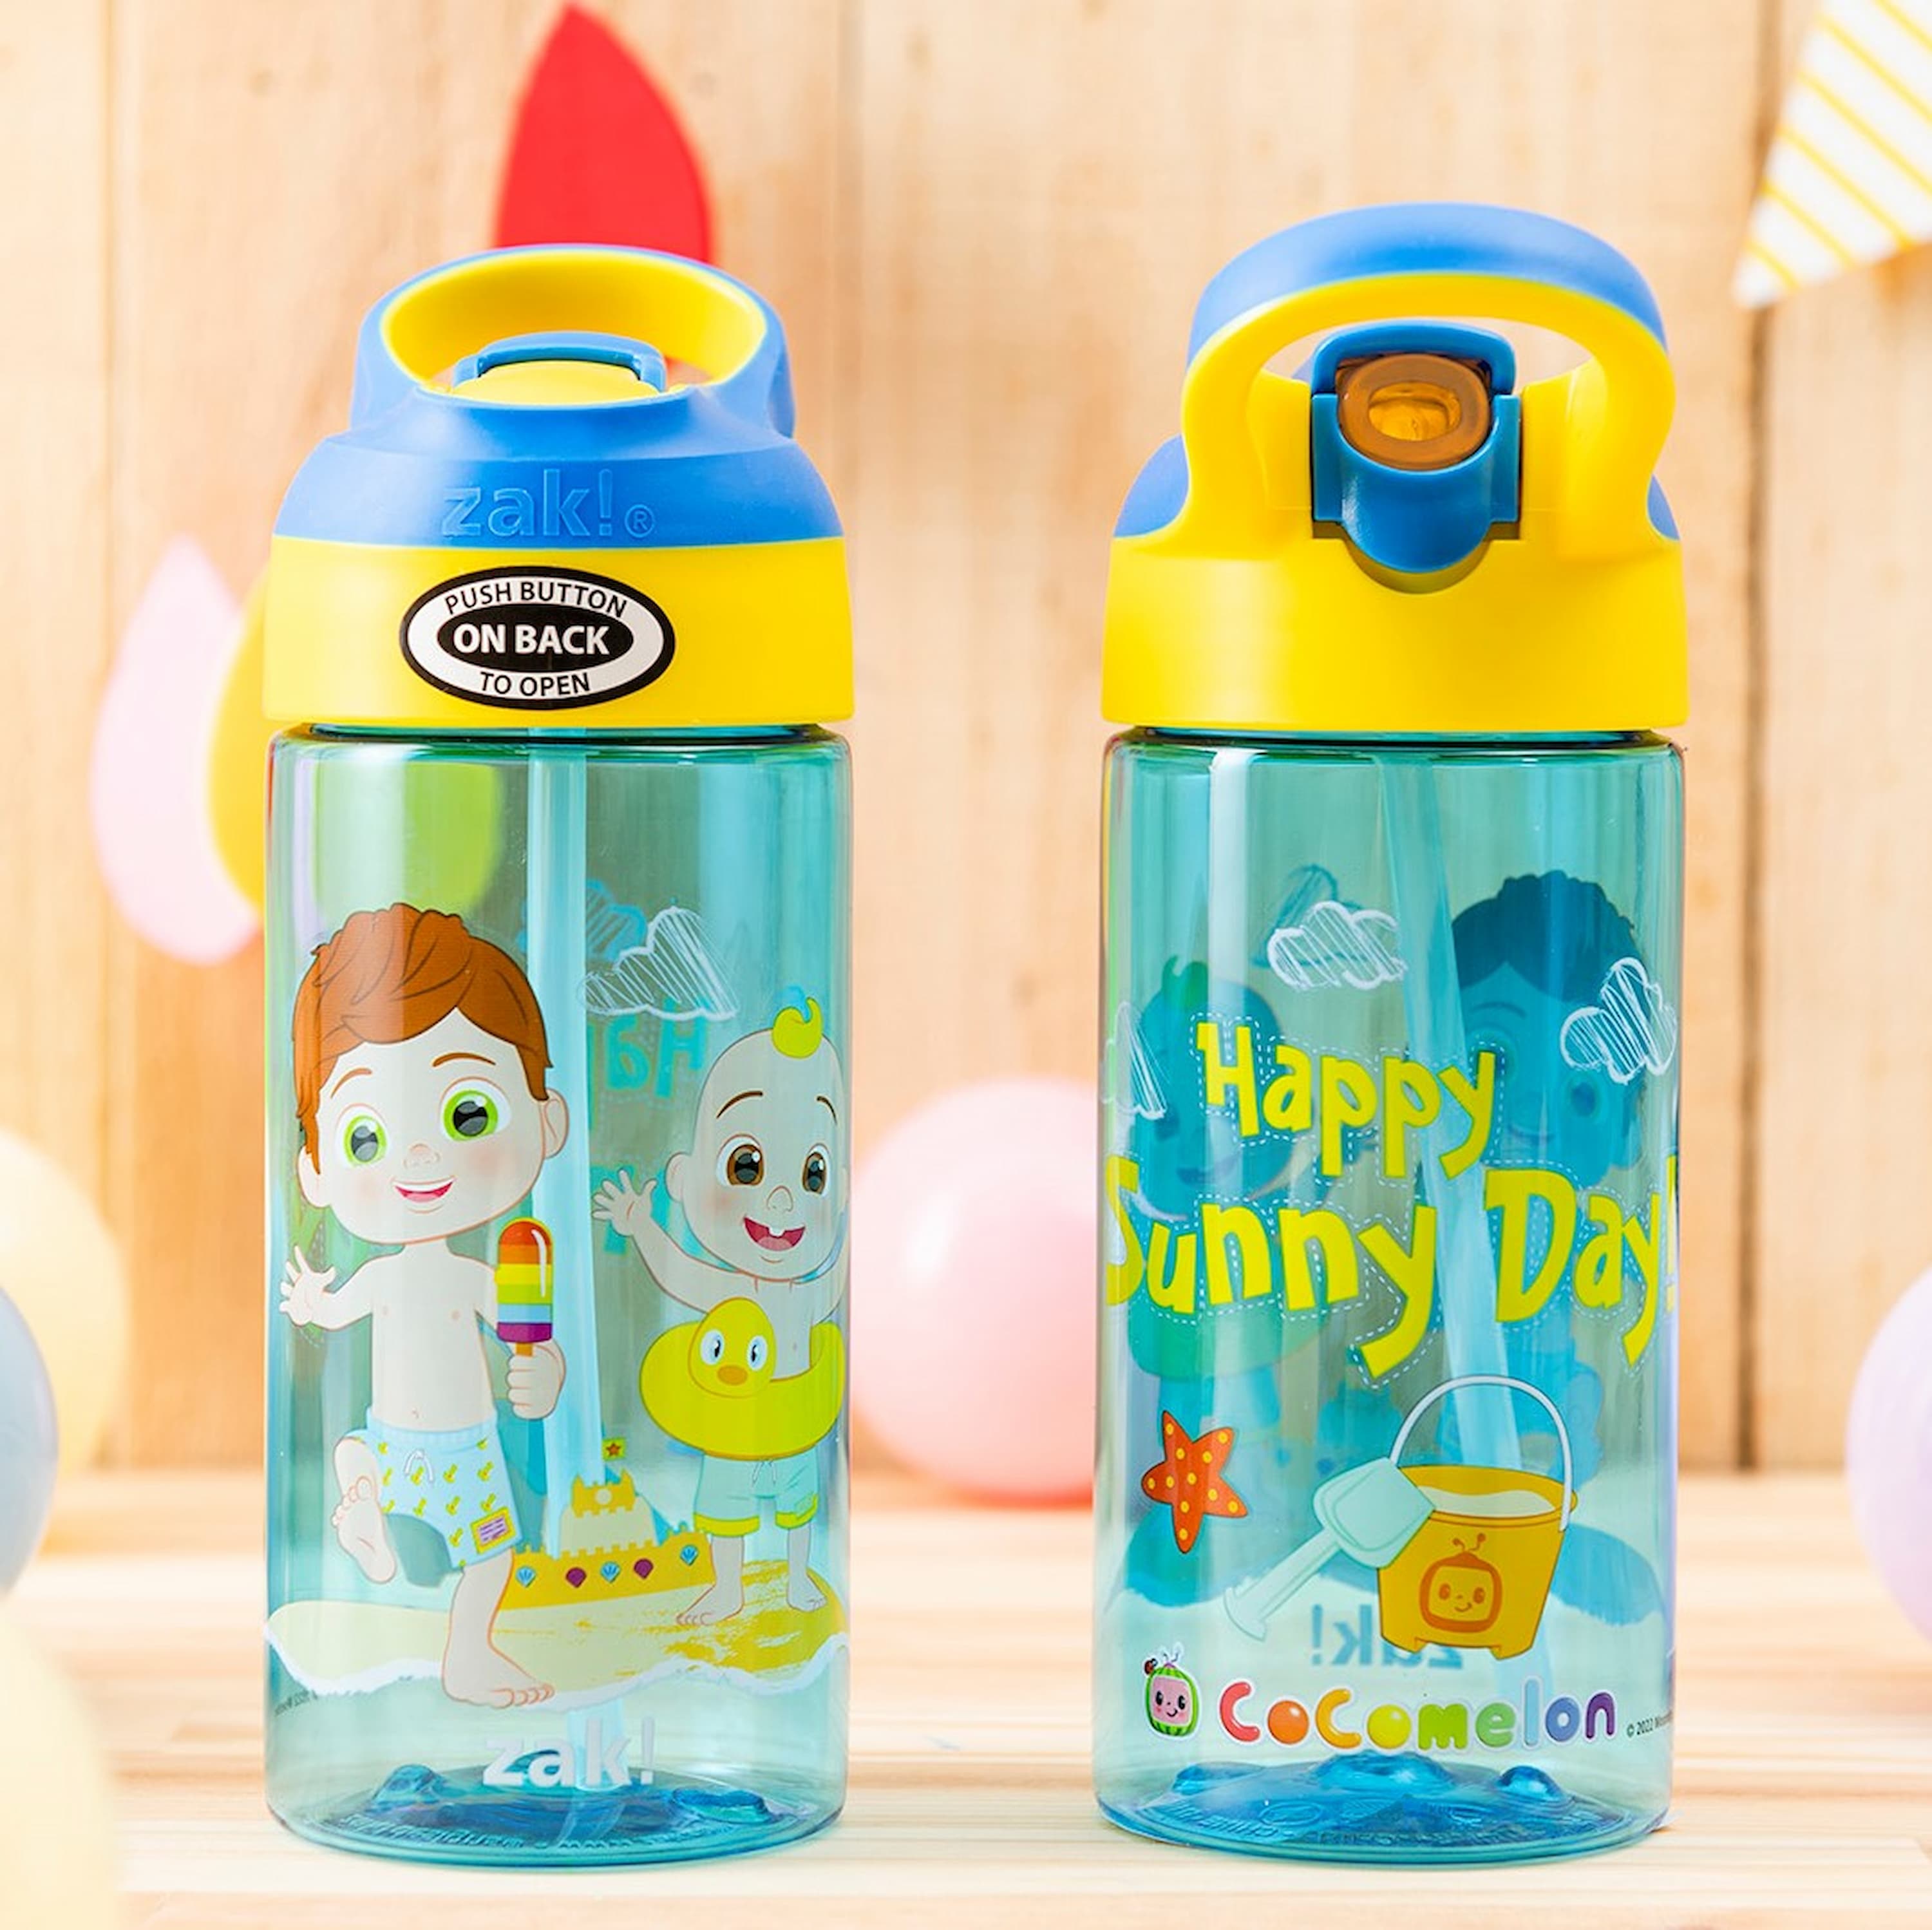 CoComelon 17.5 ounce Water Bottle, Happy, Sunny Day!, 2-piece set slideshow image 6